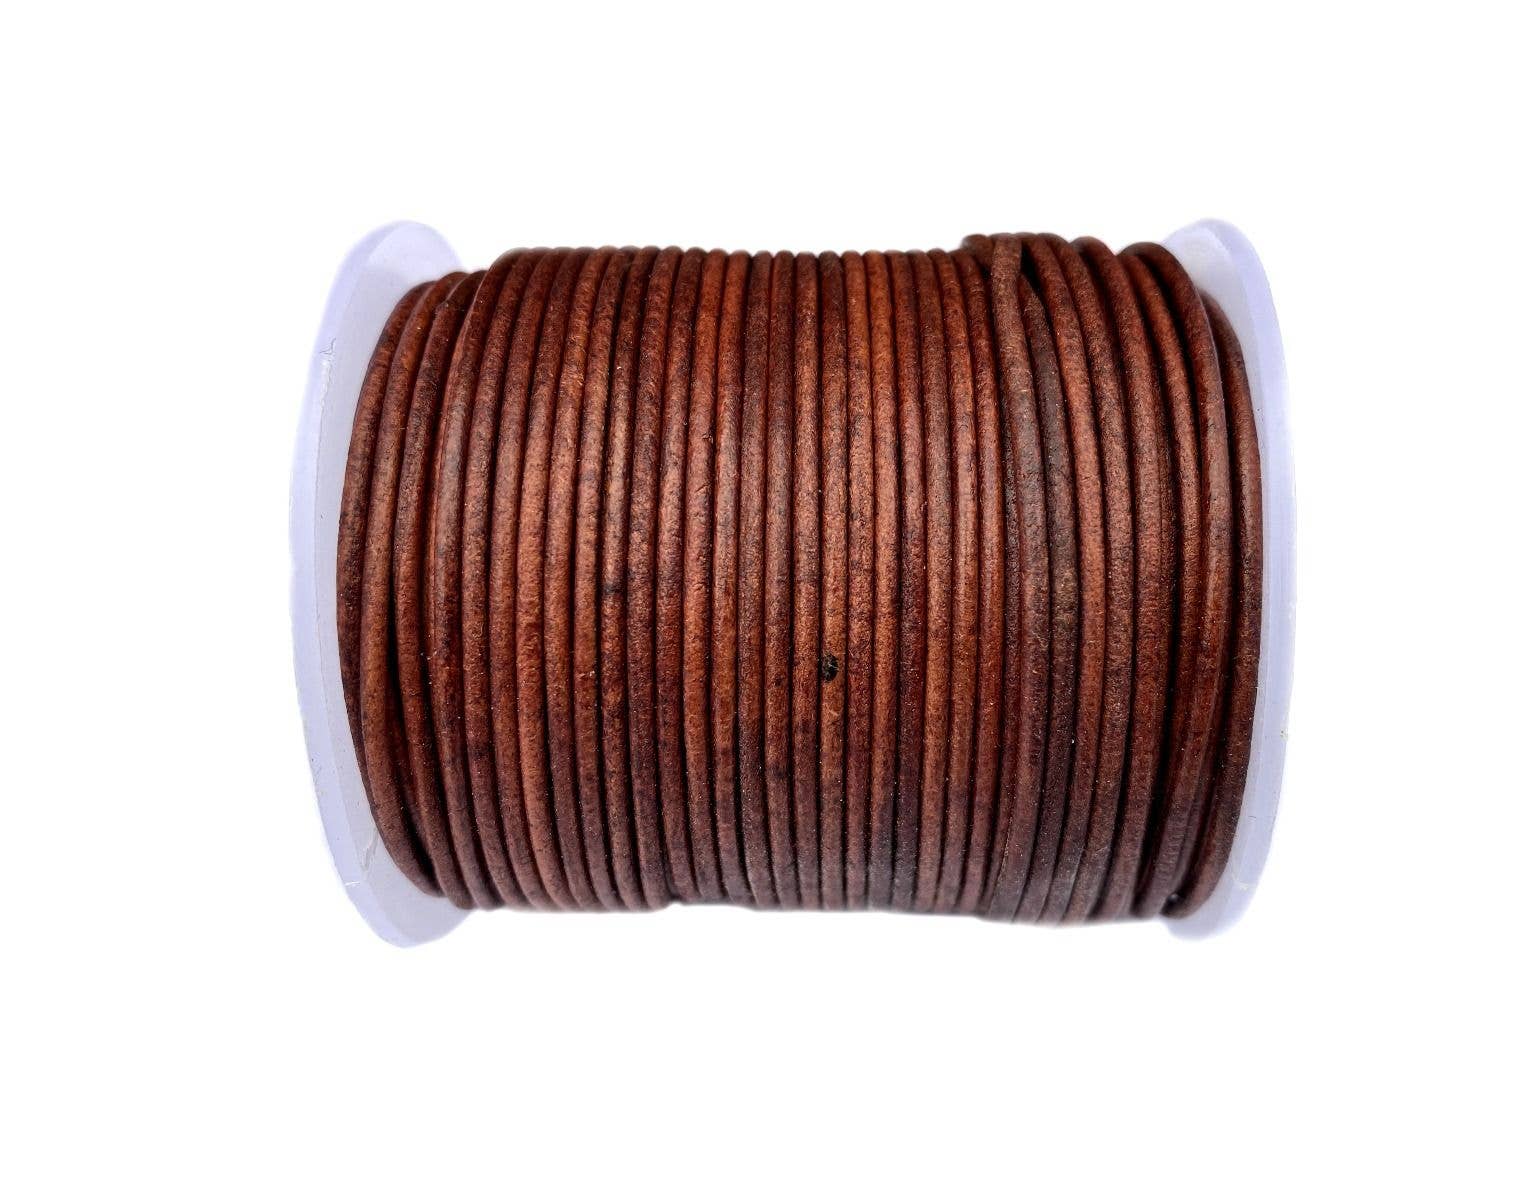 Round stitched nappa leather cord 6mm